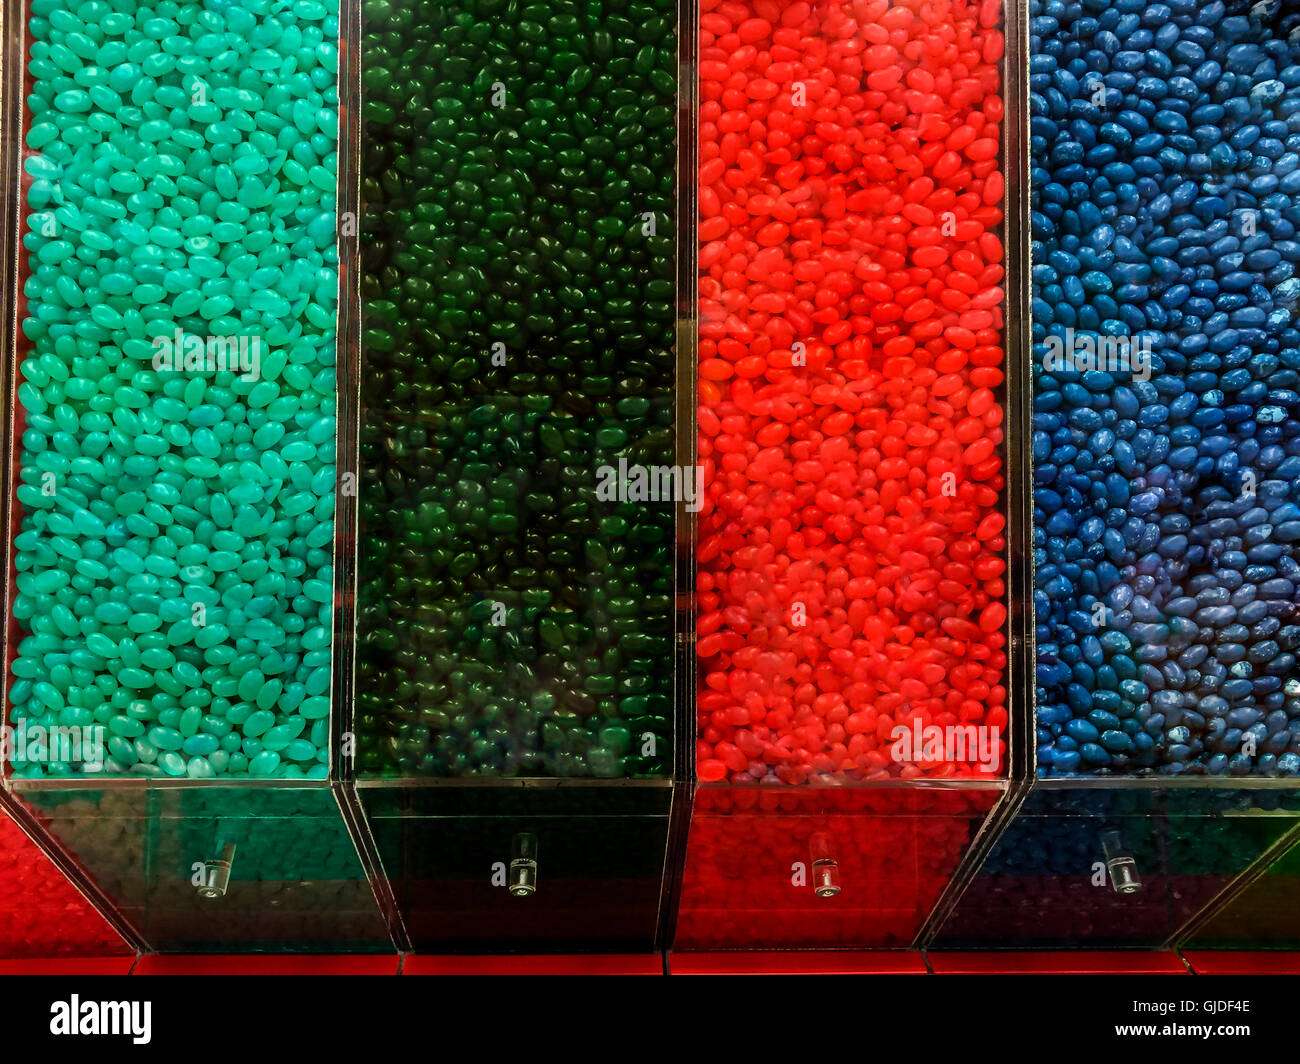 Jelly beans in many colours in a store, Canada Stock Photo